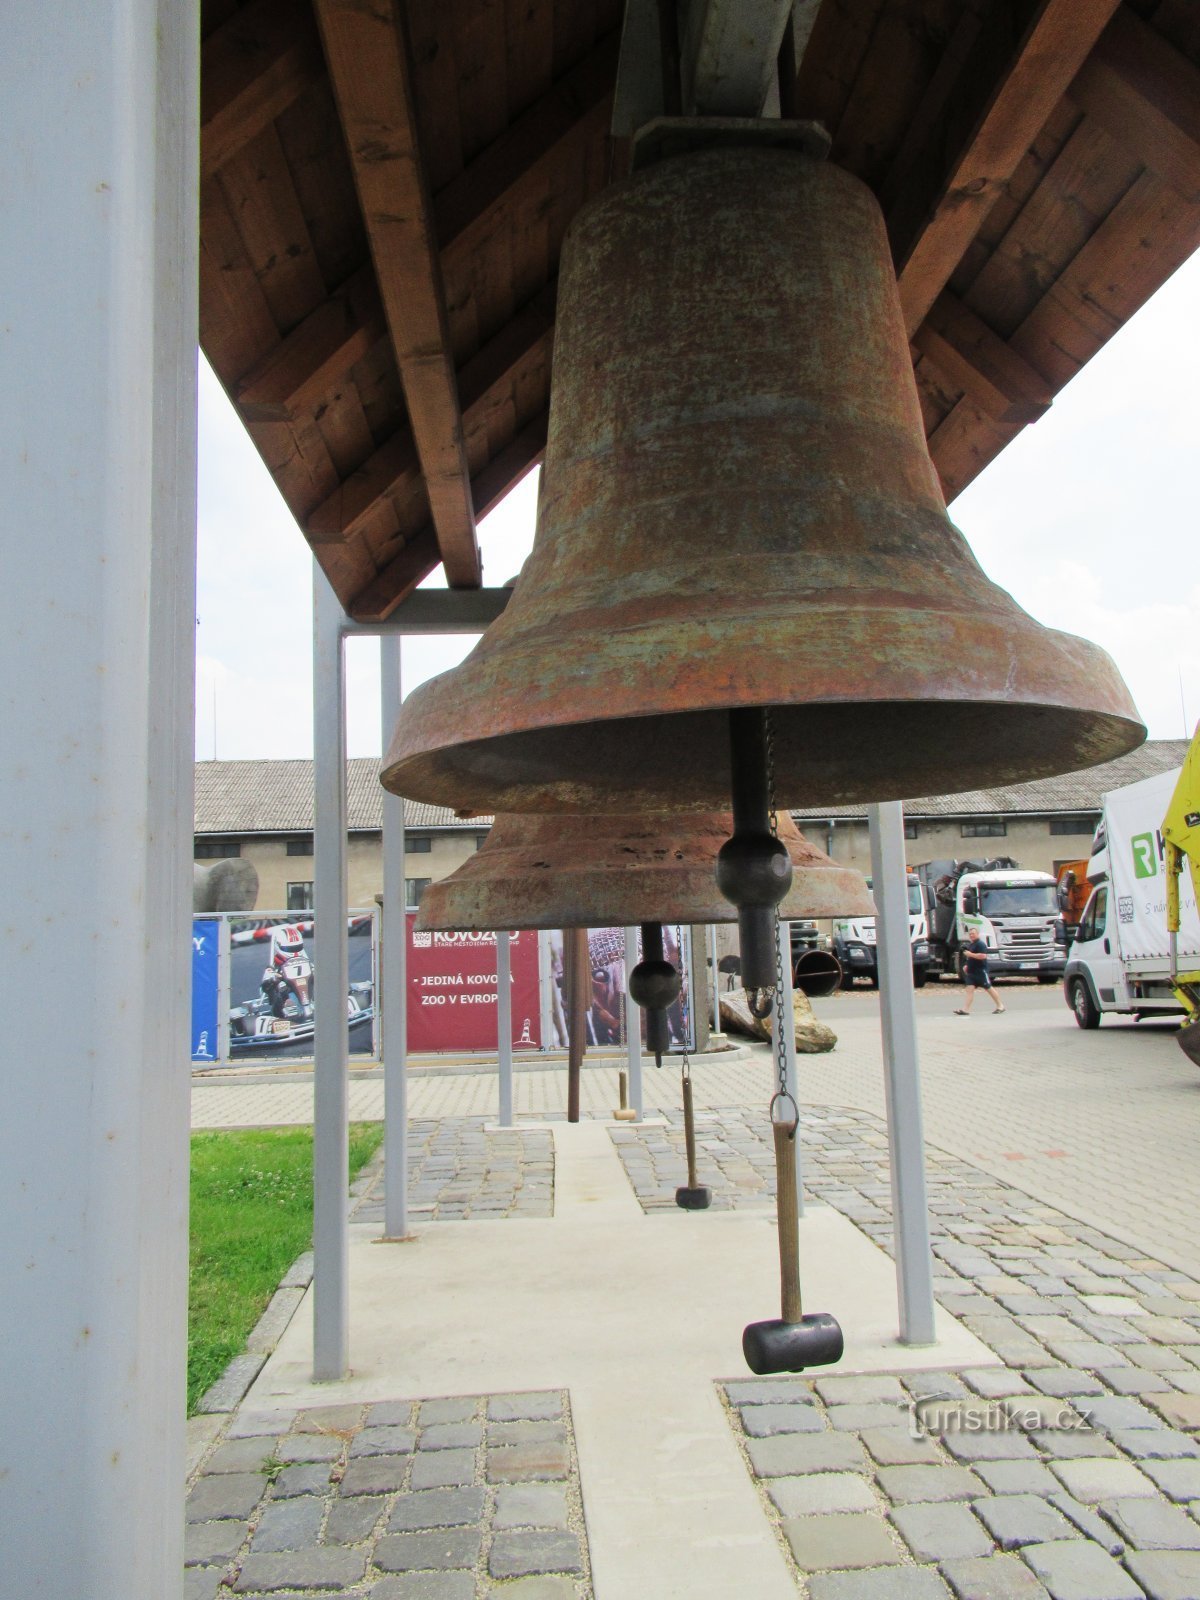 Belfry with carillon in the Kovozoo complex in St. City